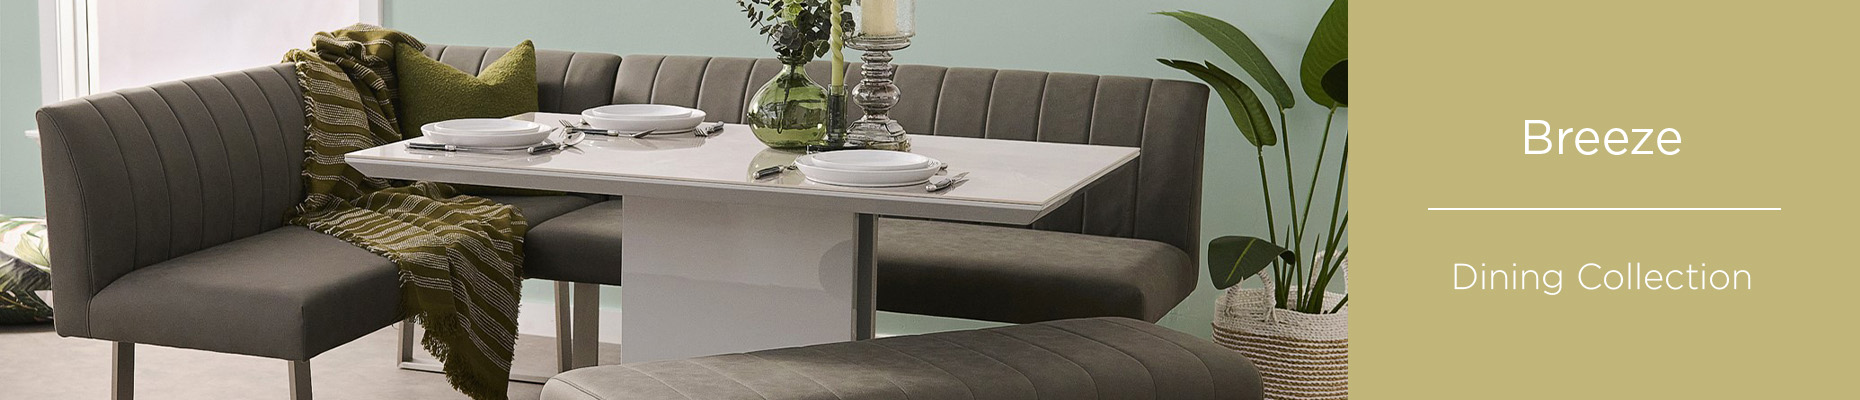 Breeze Dining collection at Forrest Furnishing